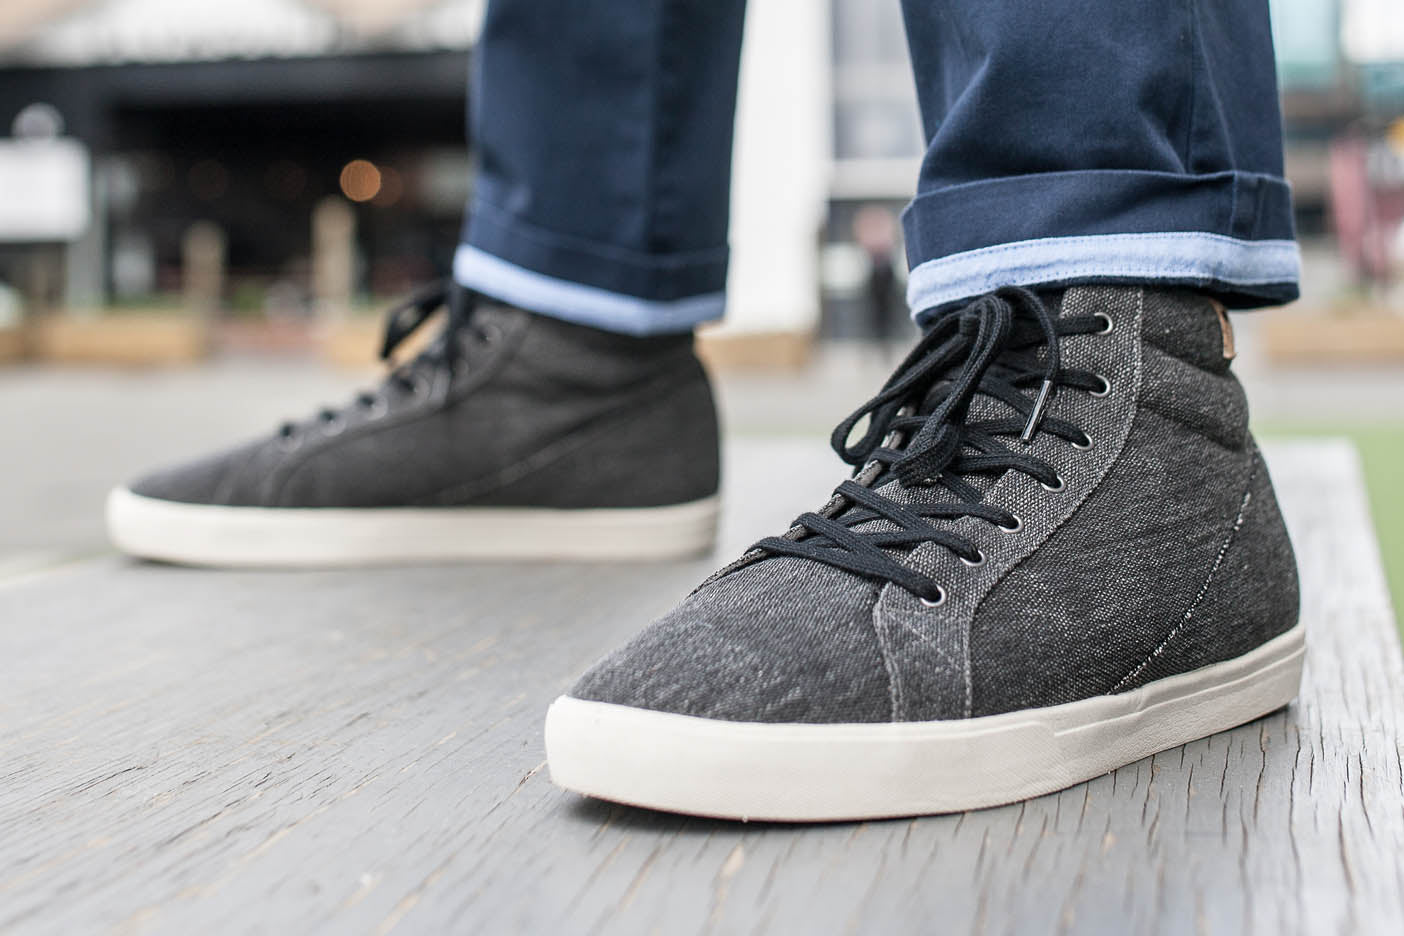 Ethical men's sneakers - SAOLA SHOES